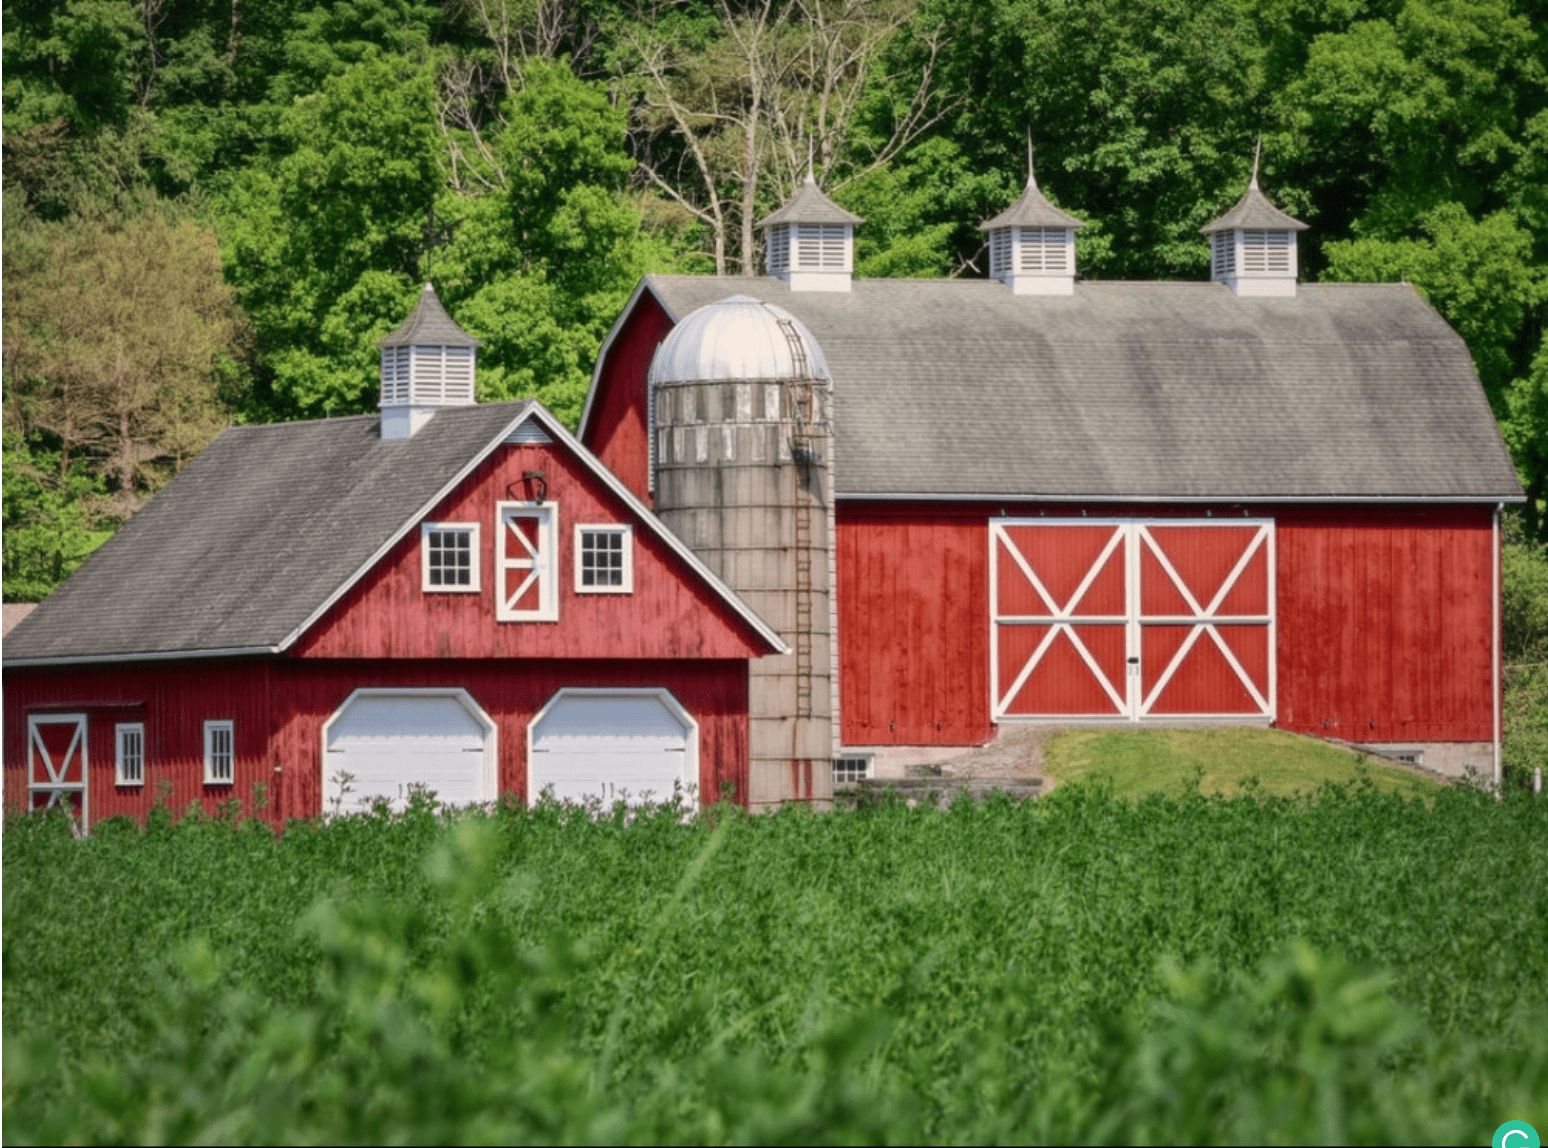 Why Are Barns Painted Red? - Red Barn